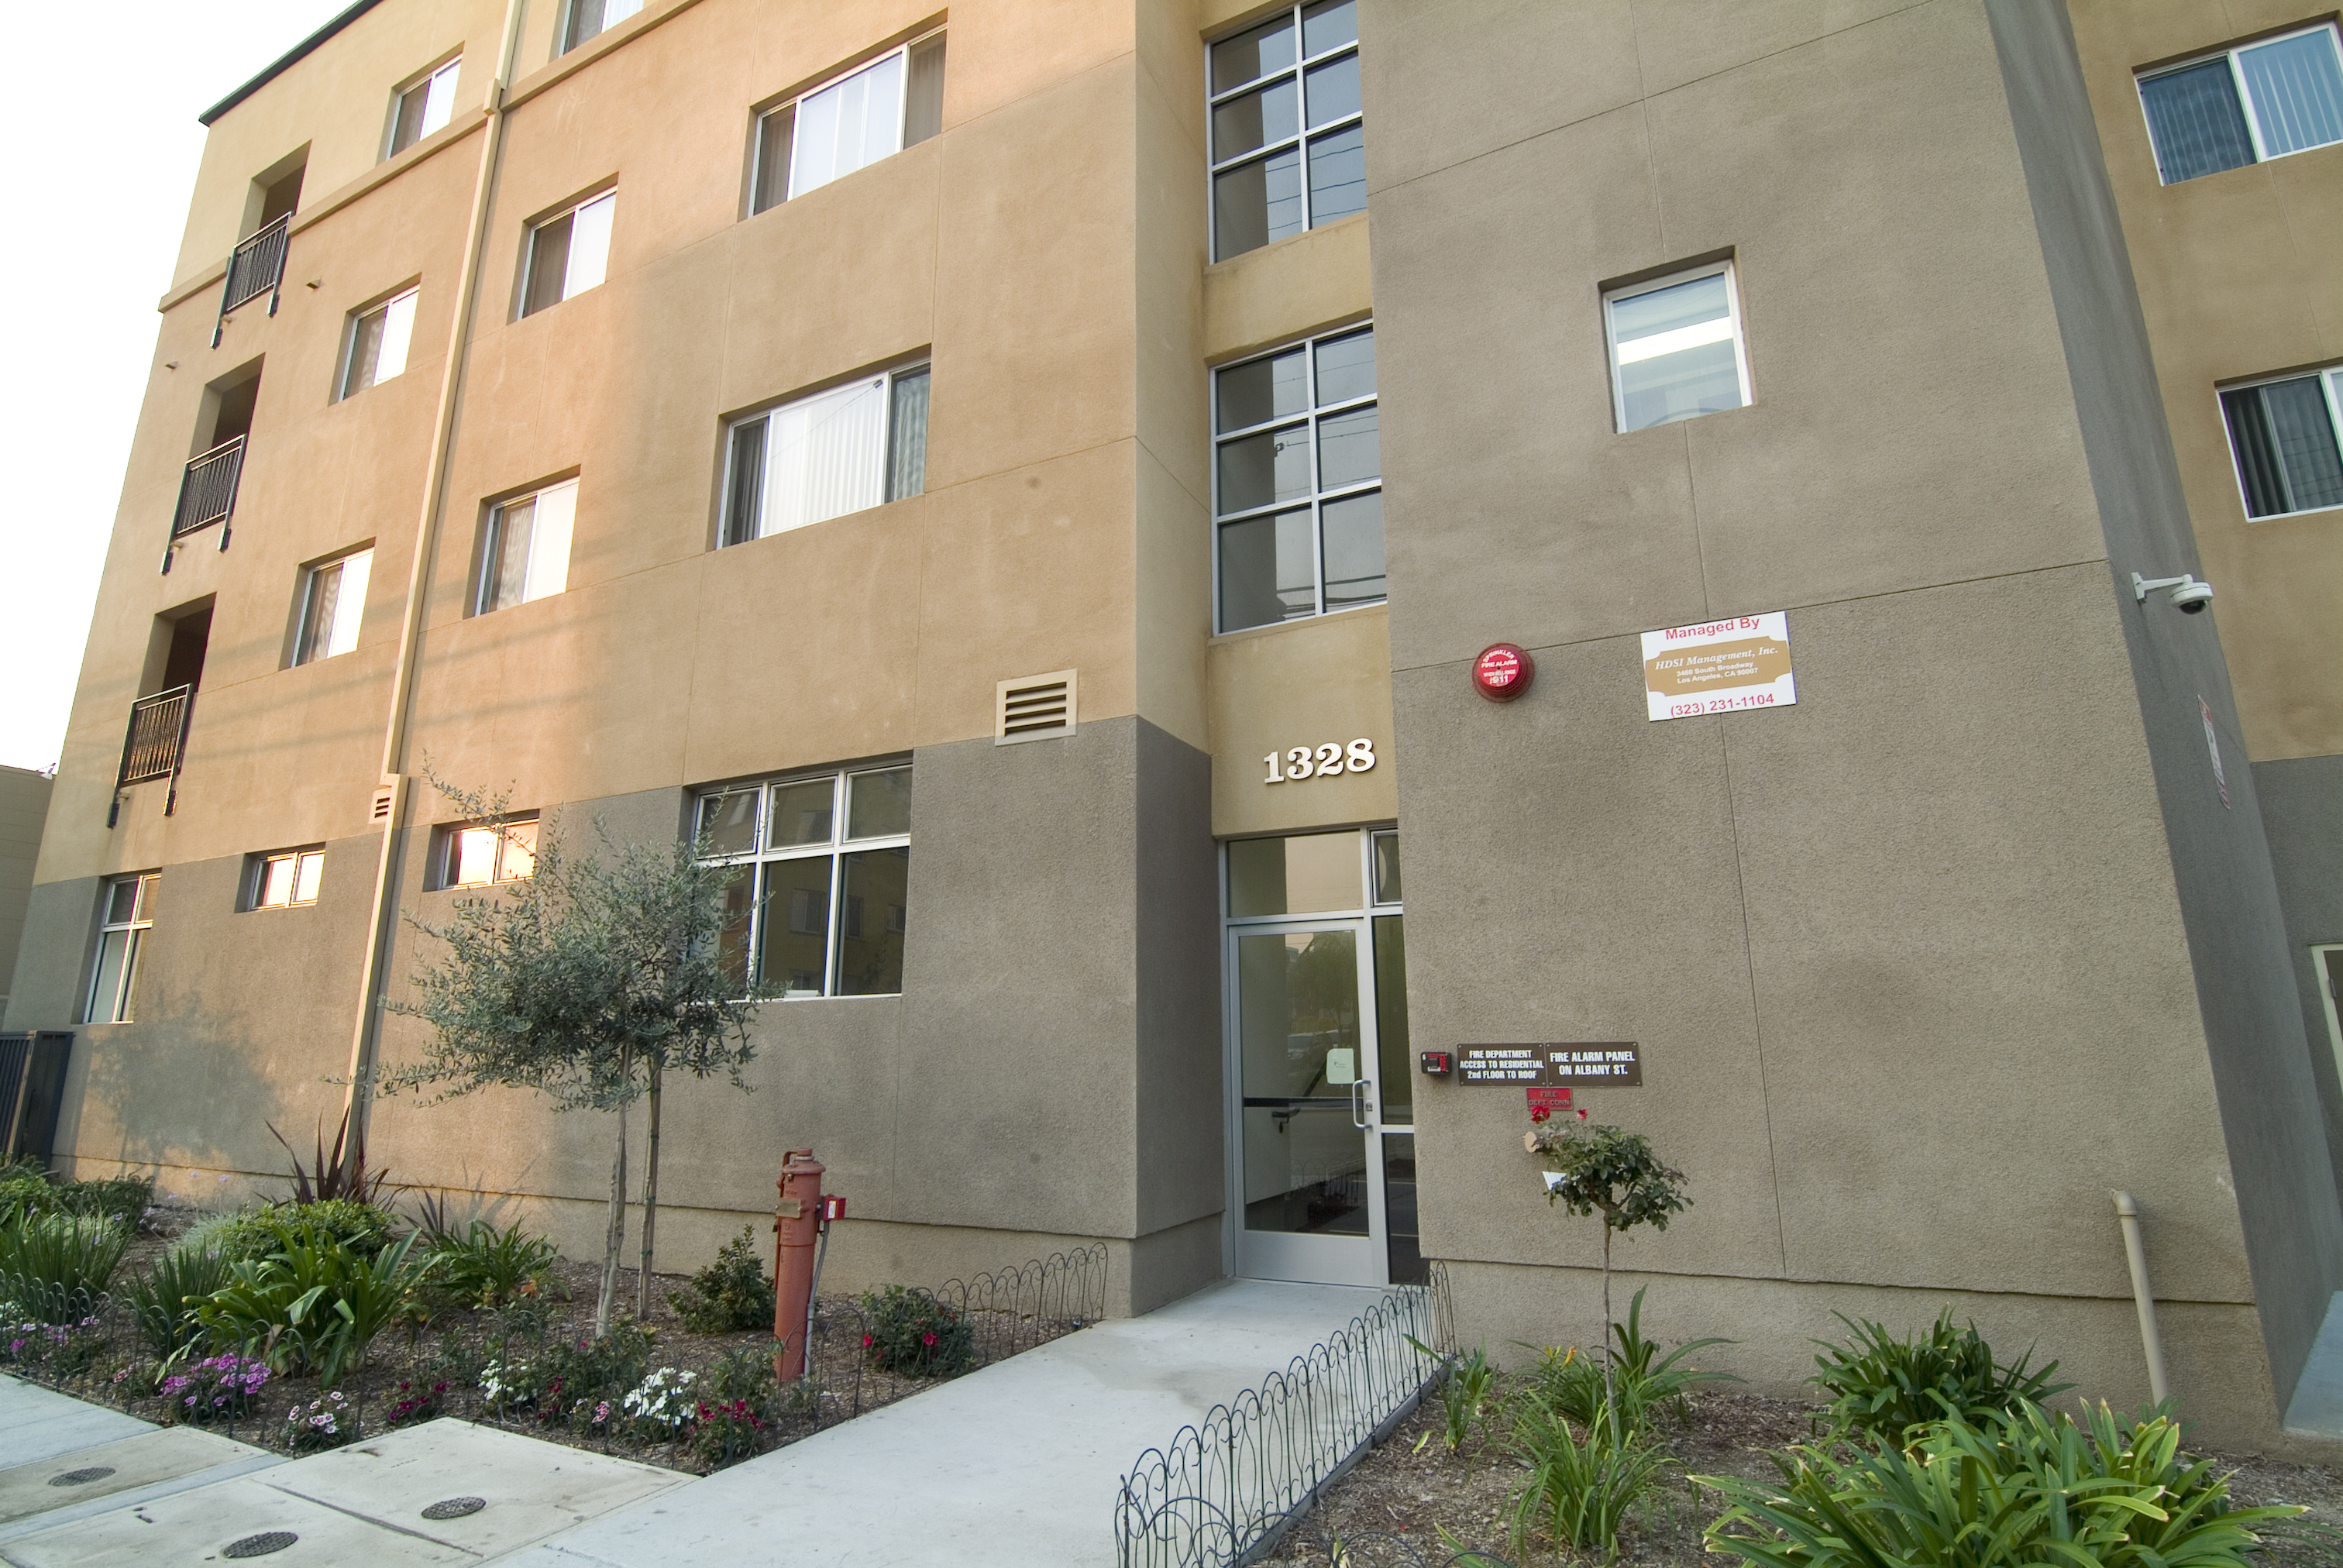 Exterior view of the side entrance to James Wood Apartments, 4 story brown building with landscaping